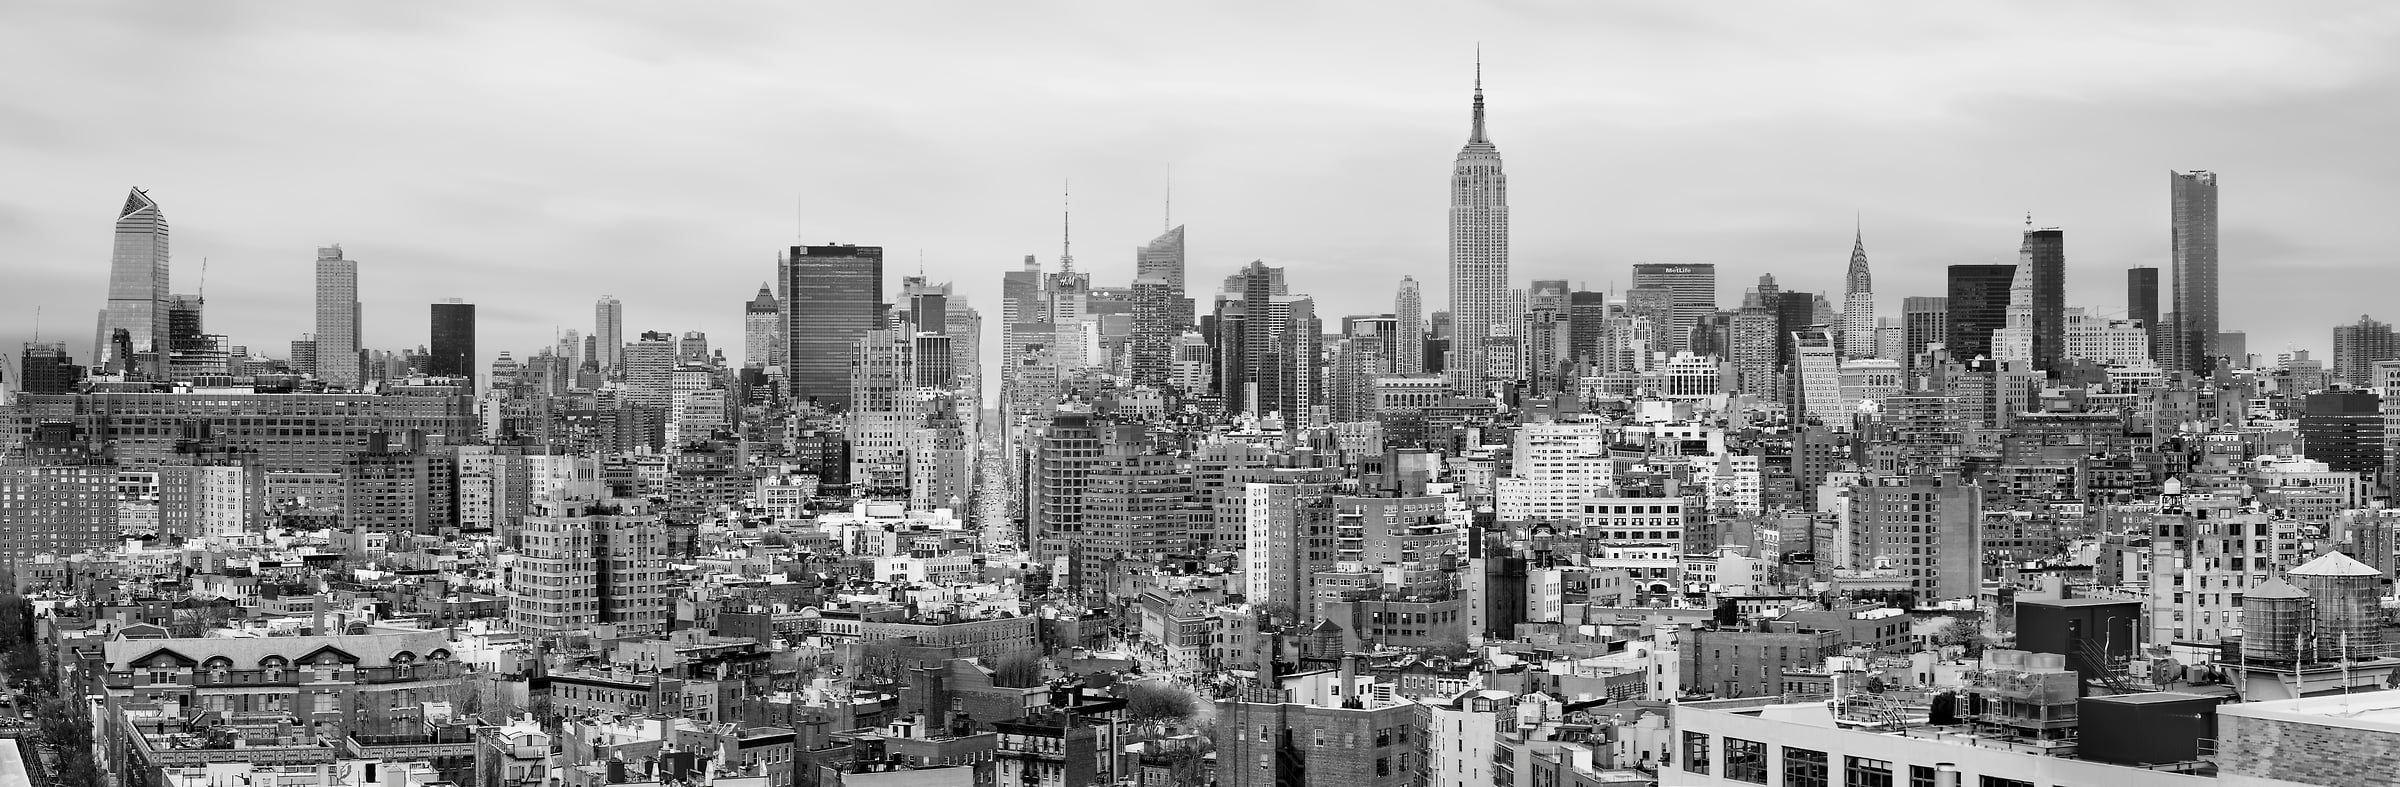 2,444 megapixels! A very high resolution, gray photo of the New York City skyline; black and white photograph created by Dan Piech in Manhattan, New York City.